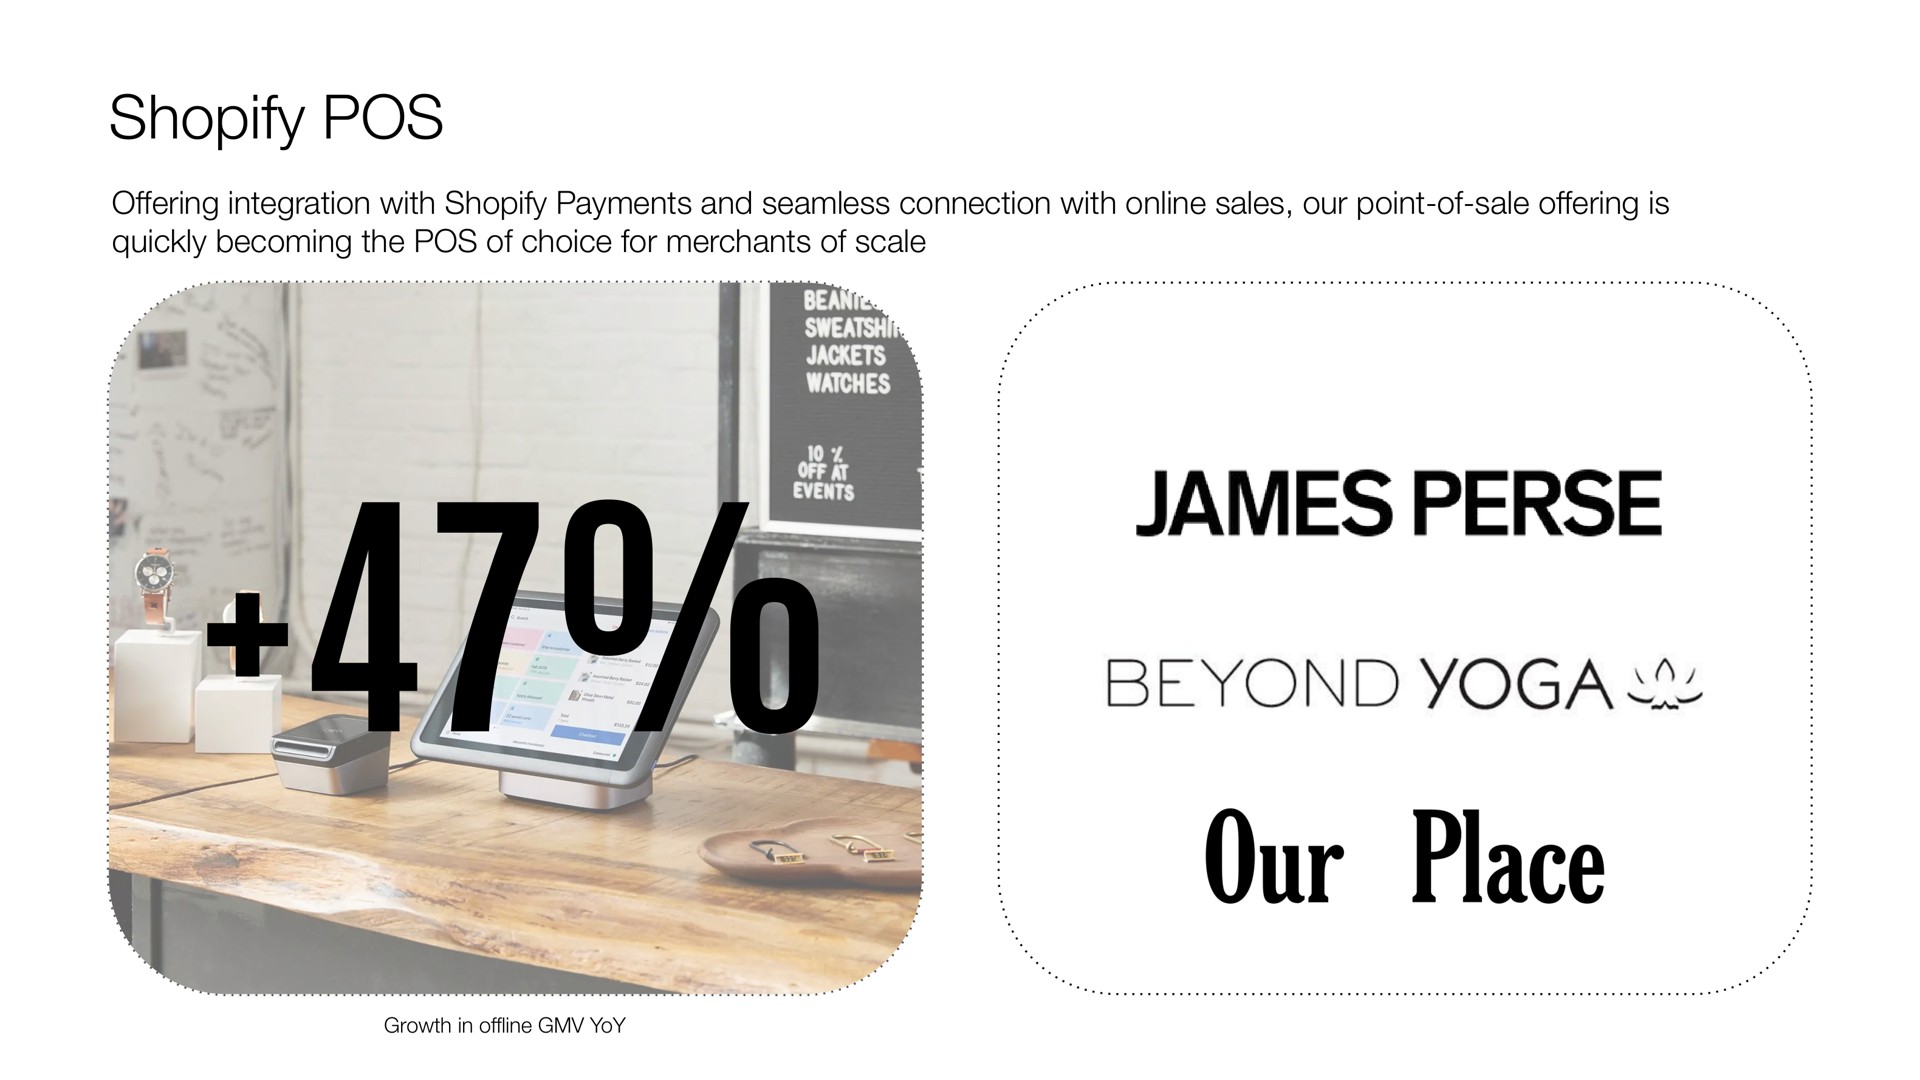 pos james perse beyond yoga our place | Shopify